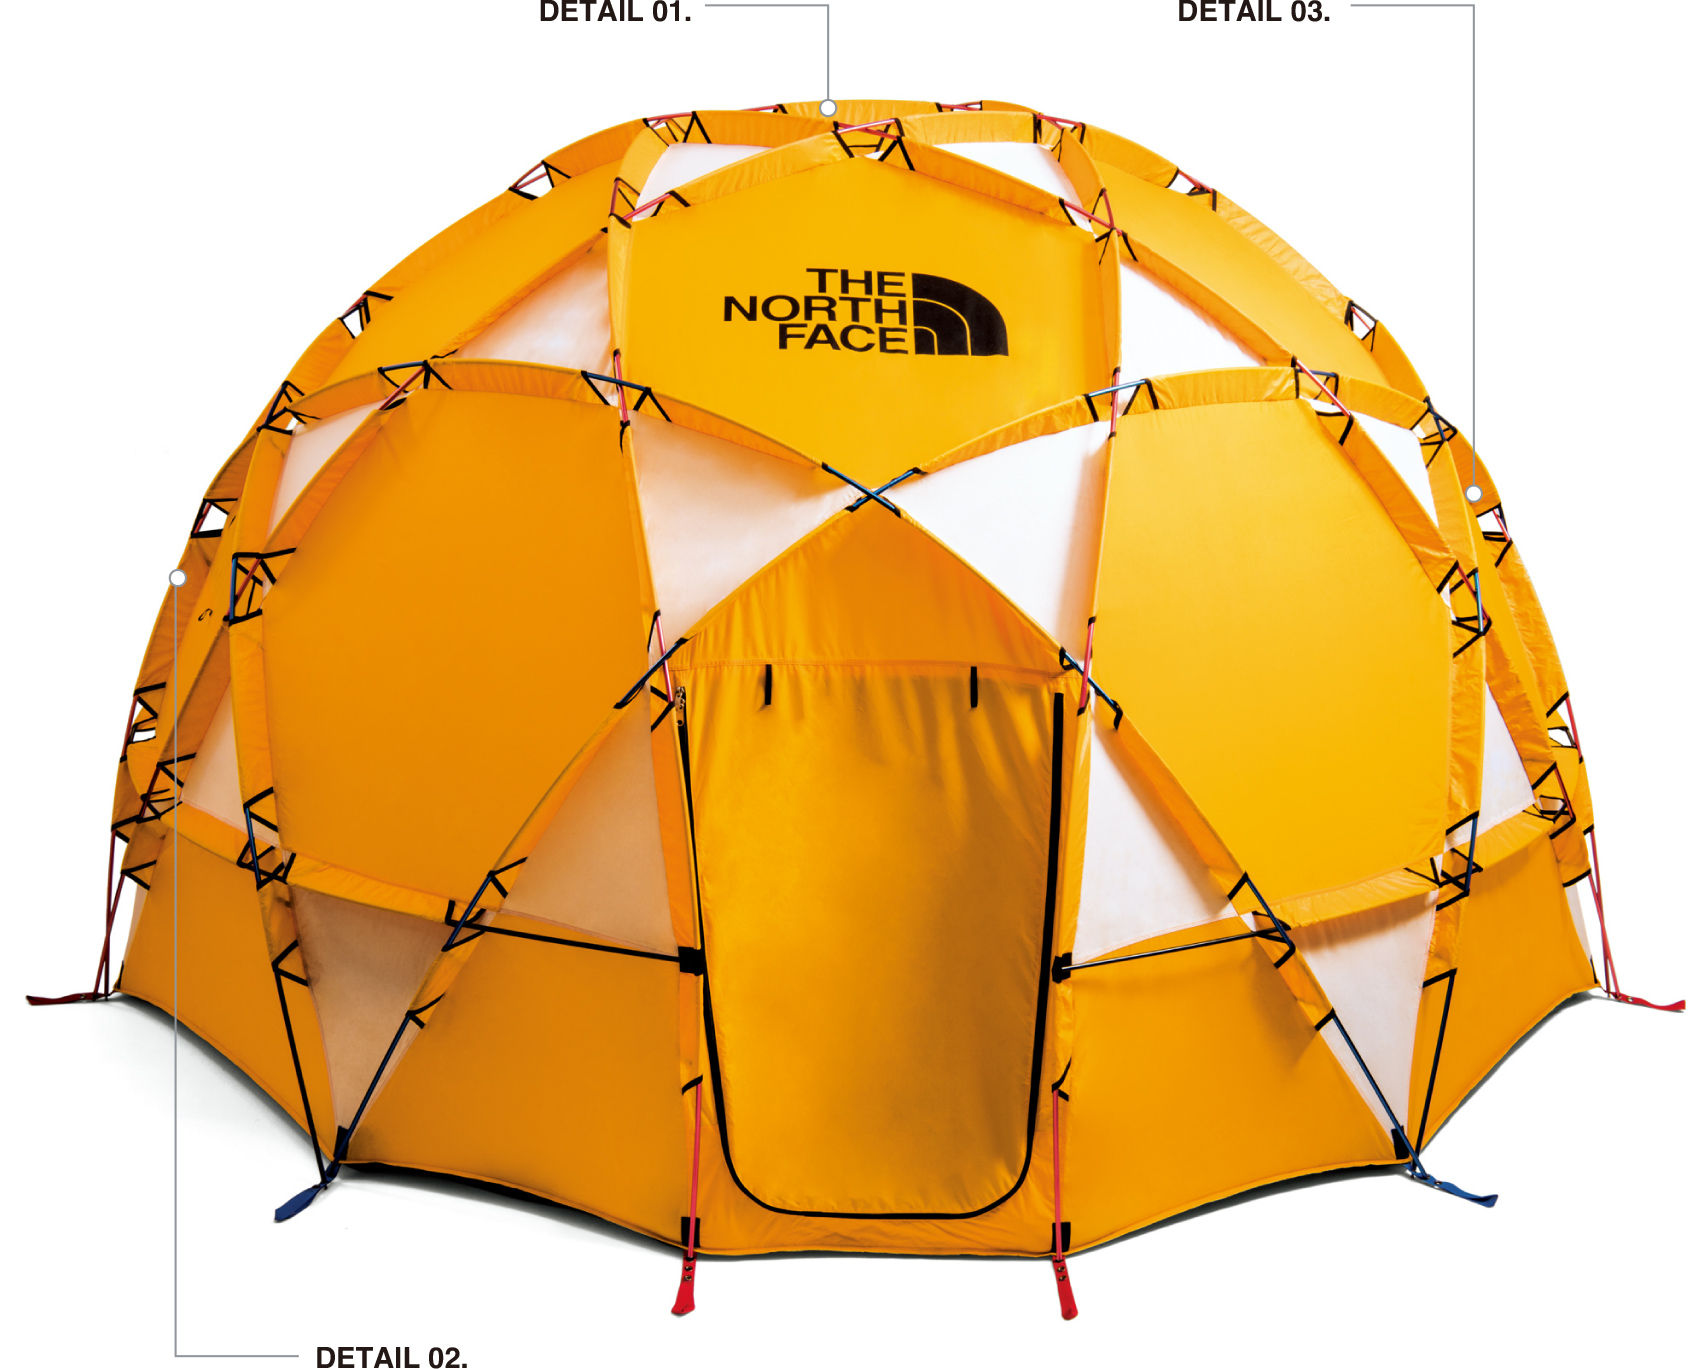 2-METER DOME